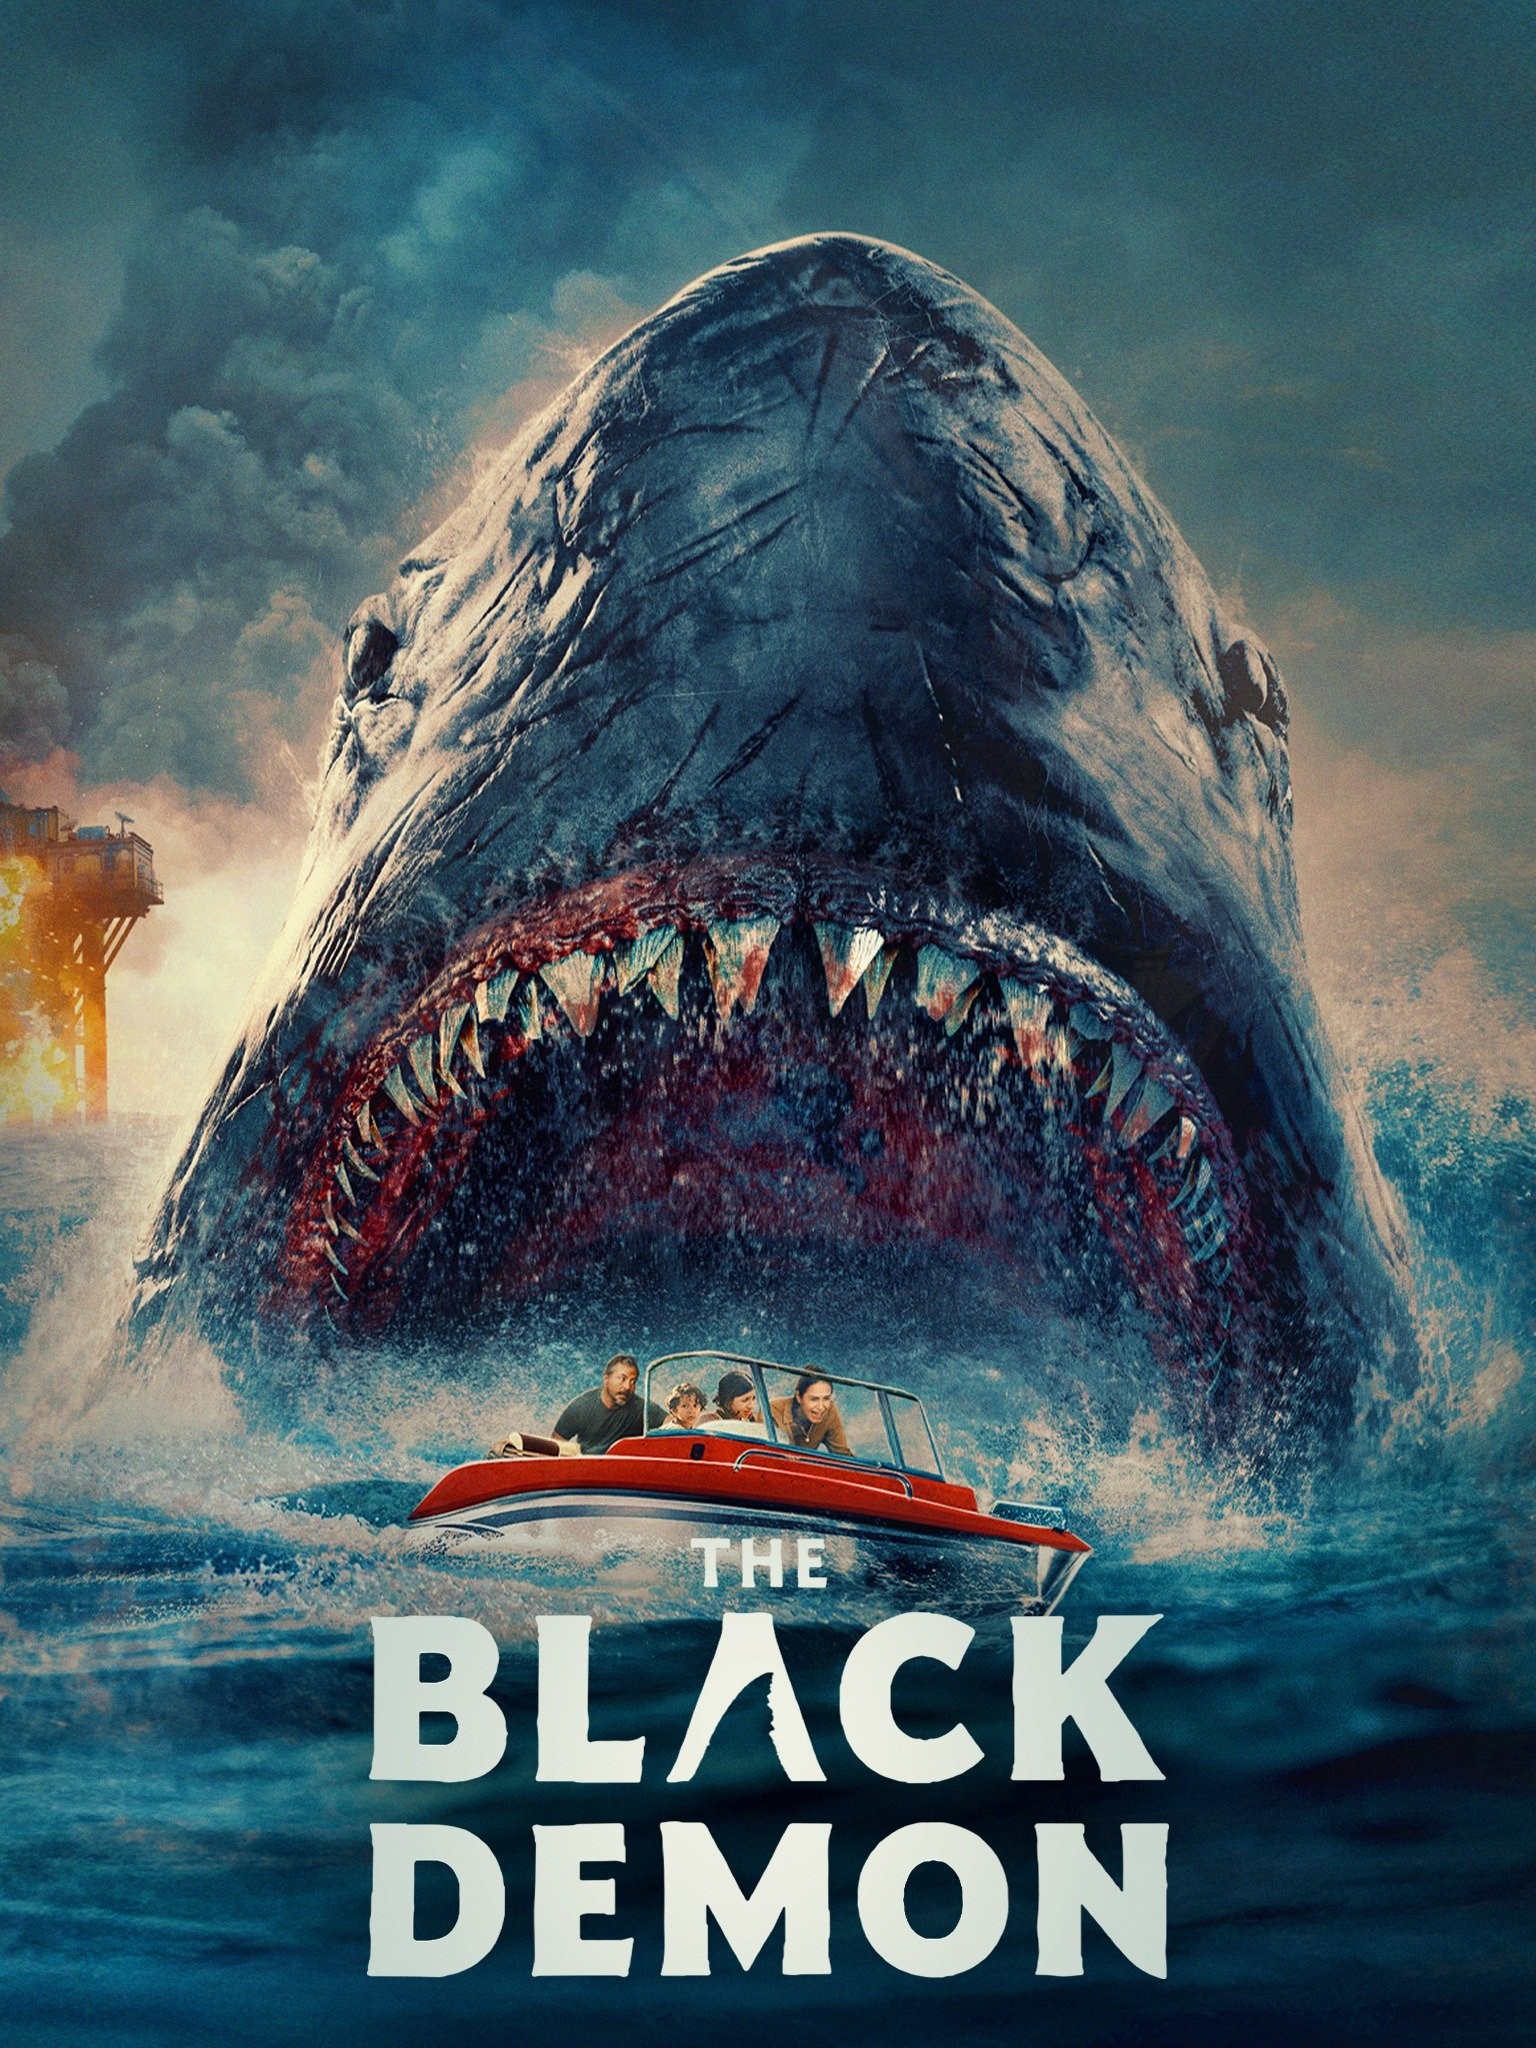 Go Behind the Scenes of Mystery of the Black Demon Shark